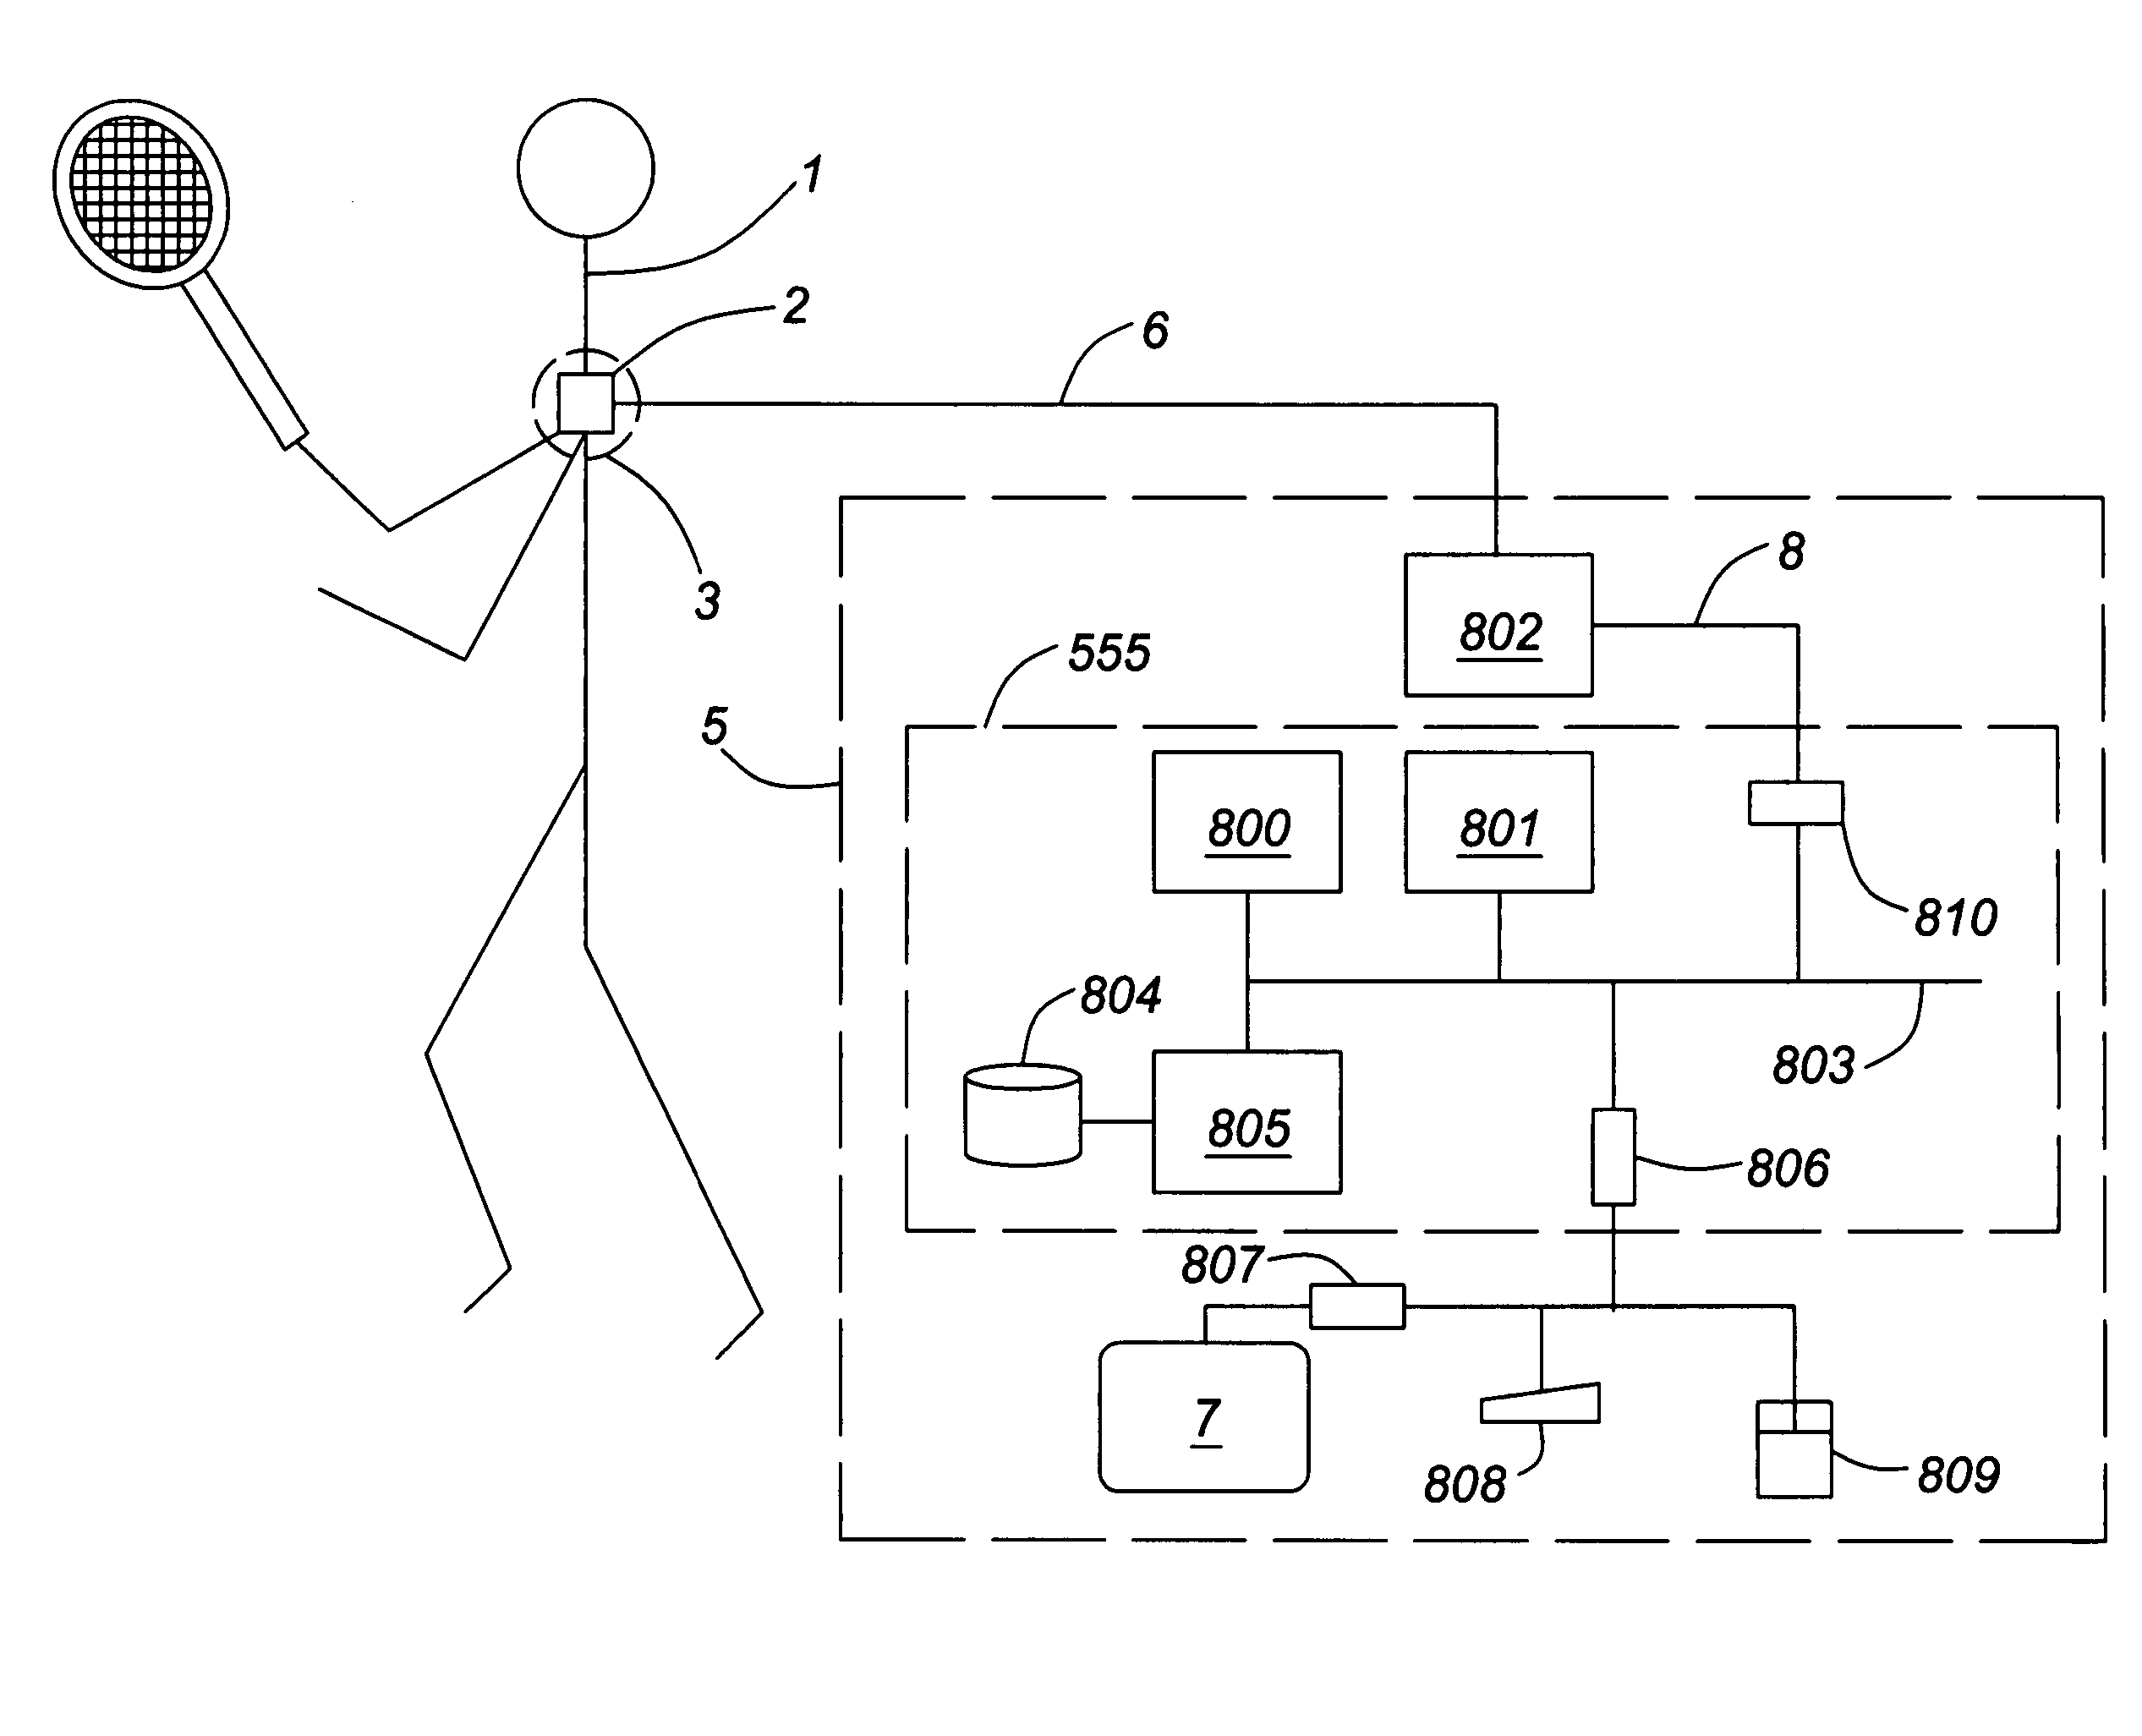 Kinesthetic training system with composite feedback